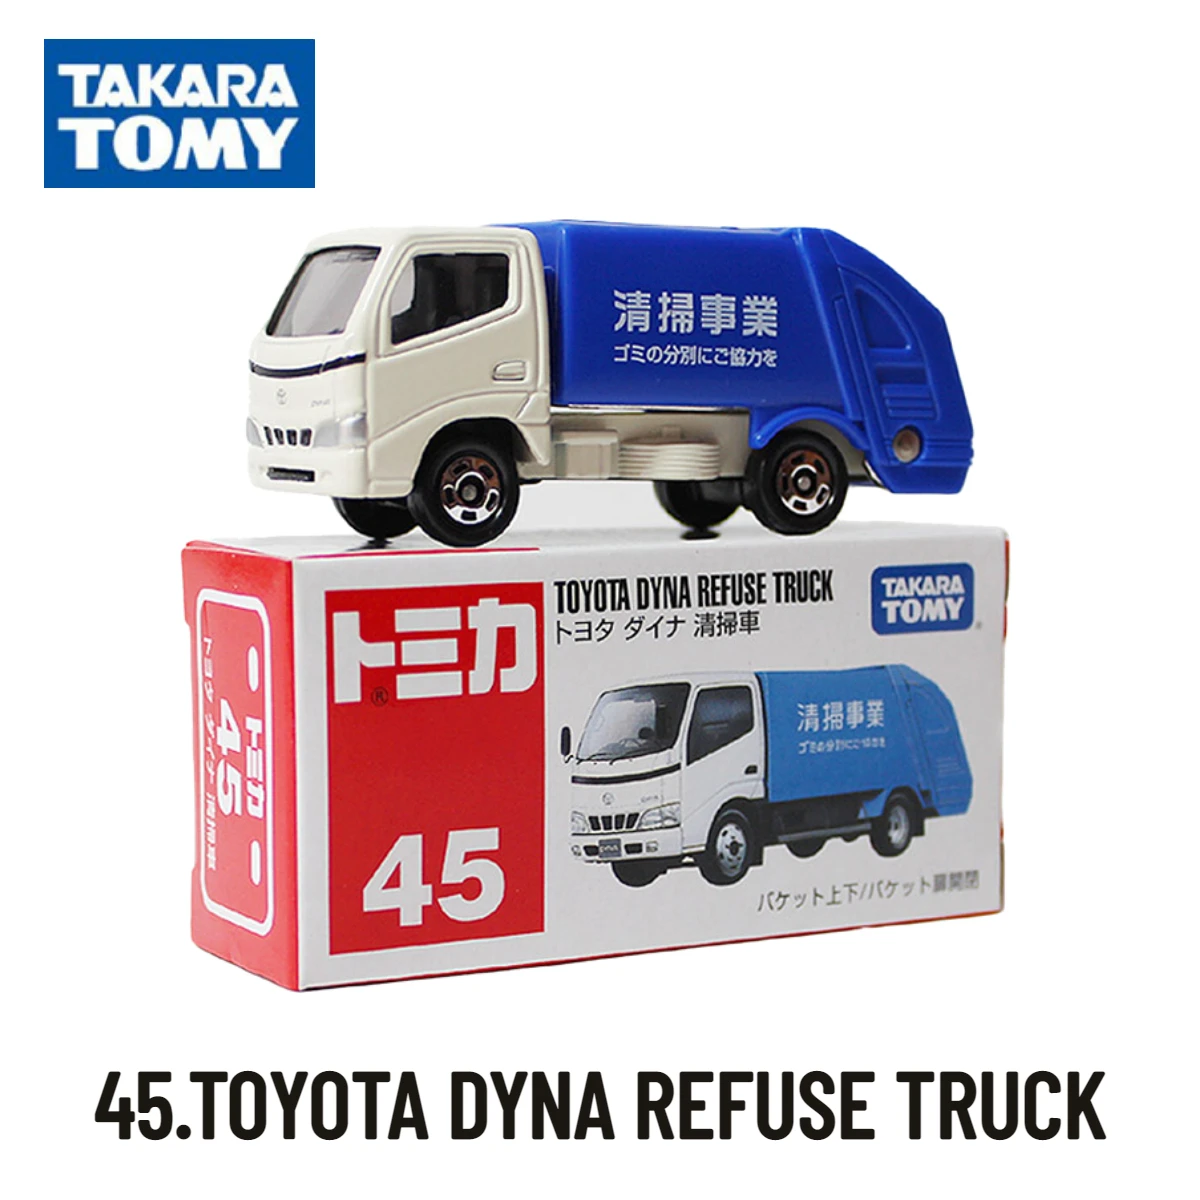 

Takara Tomy Tomica Cars 31-60, Scale Model 45.TOYOTA DYNA REFUSE TRUCK Replica, Kids Room Decor Xmas Gift Toys for Baby Boys